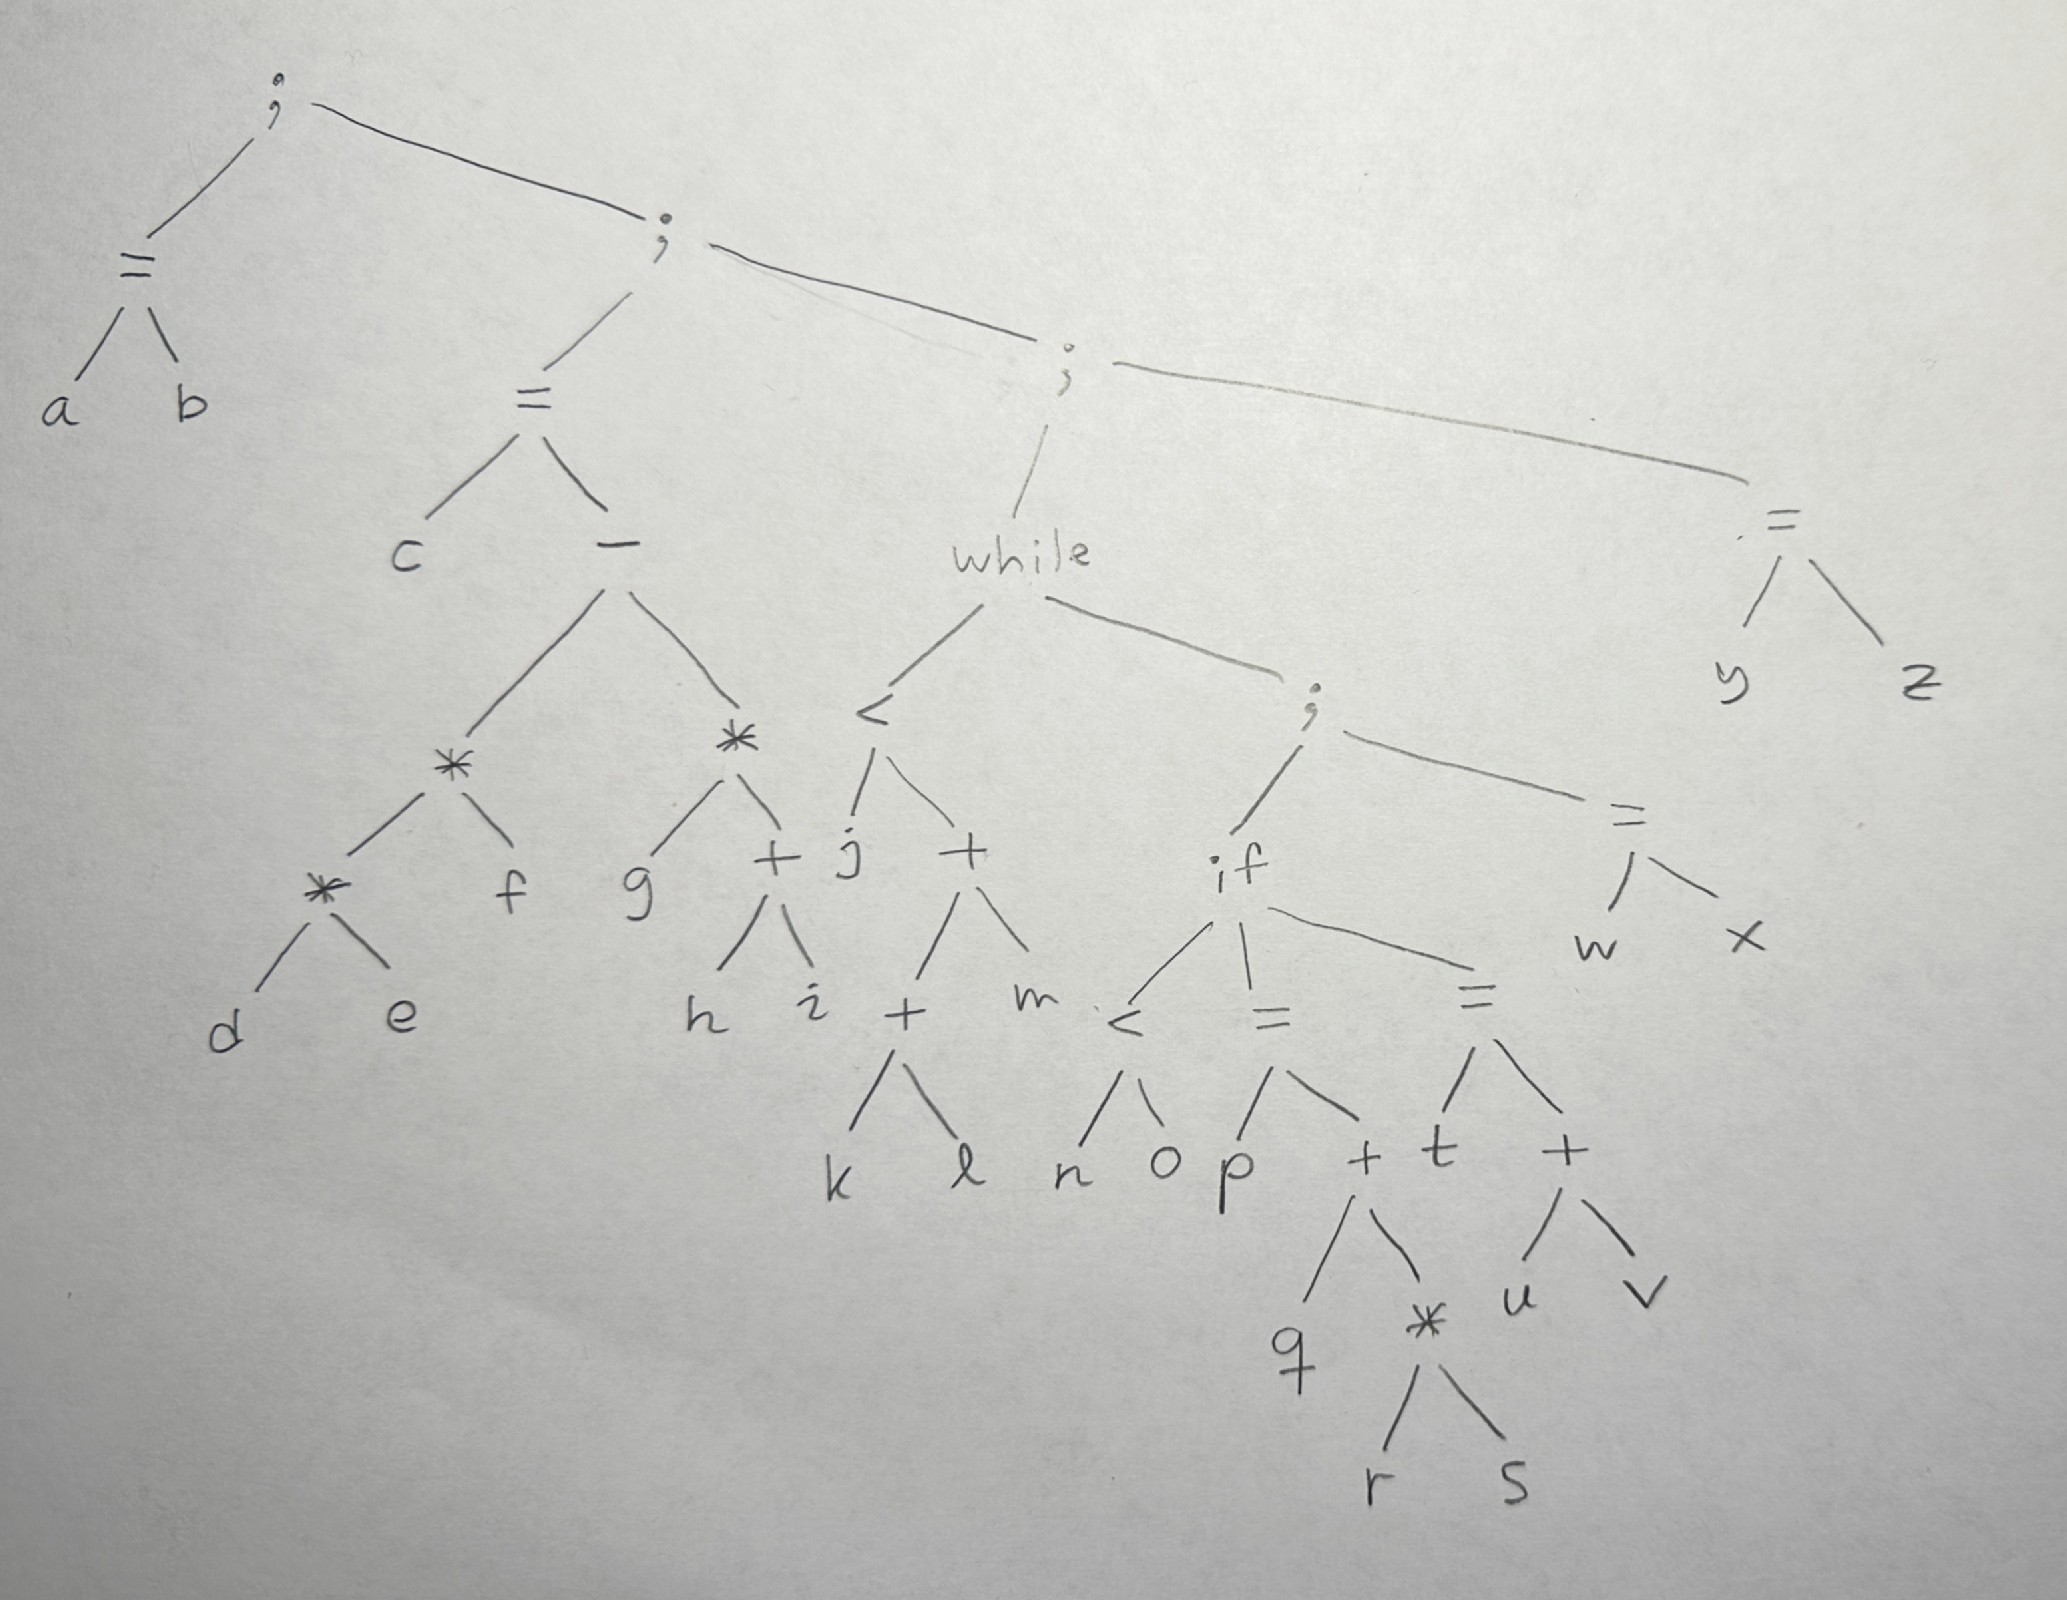 An (abstract) syntax tree